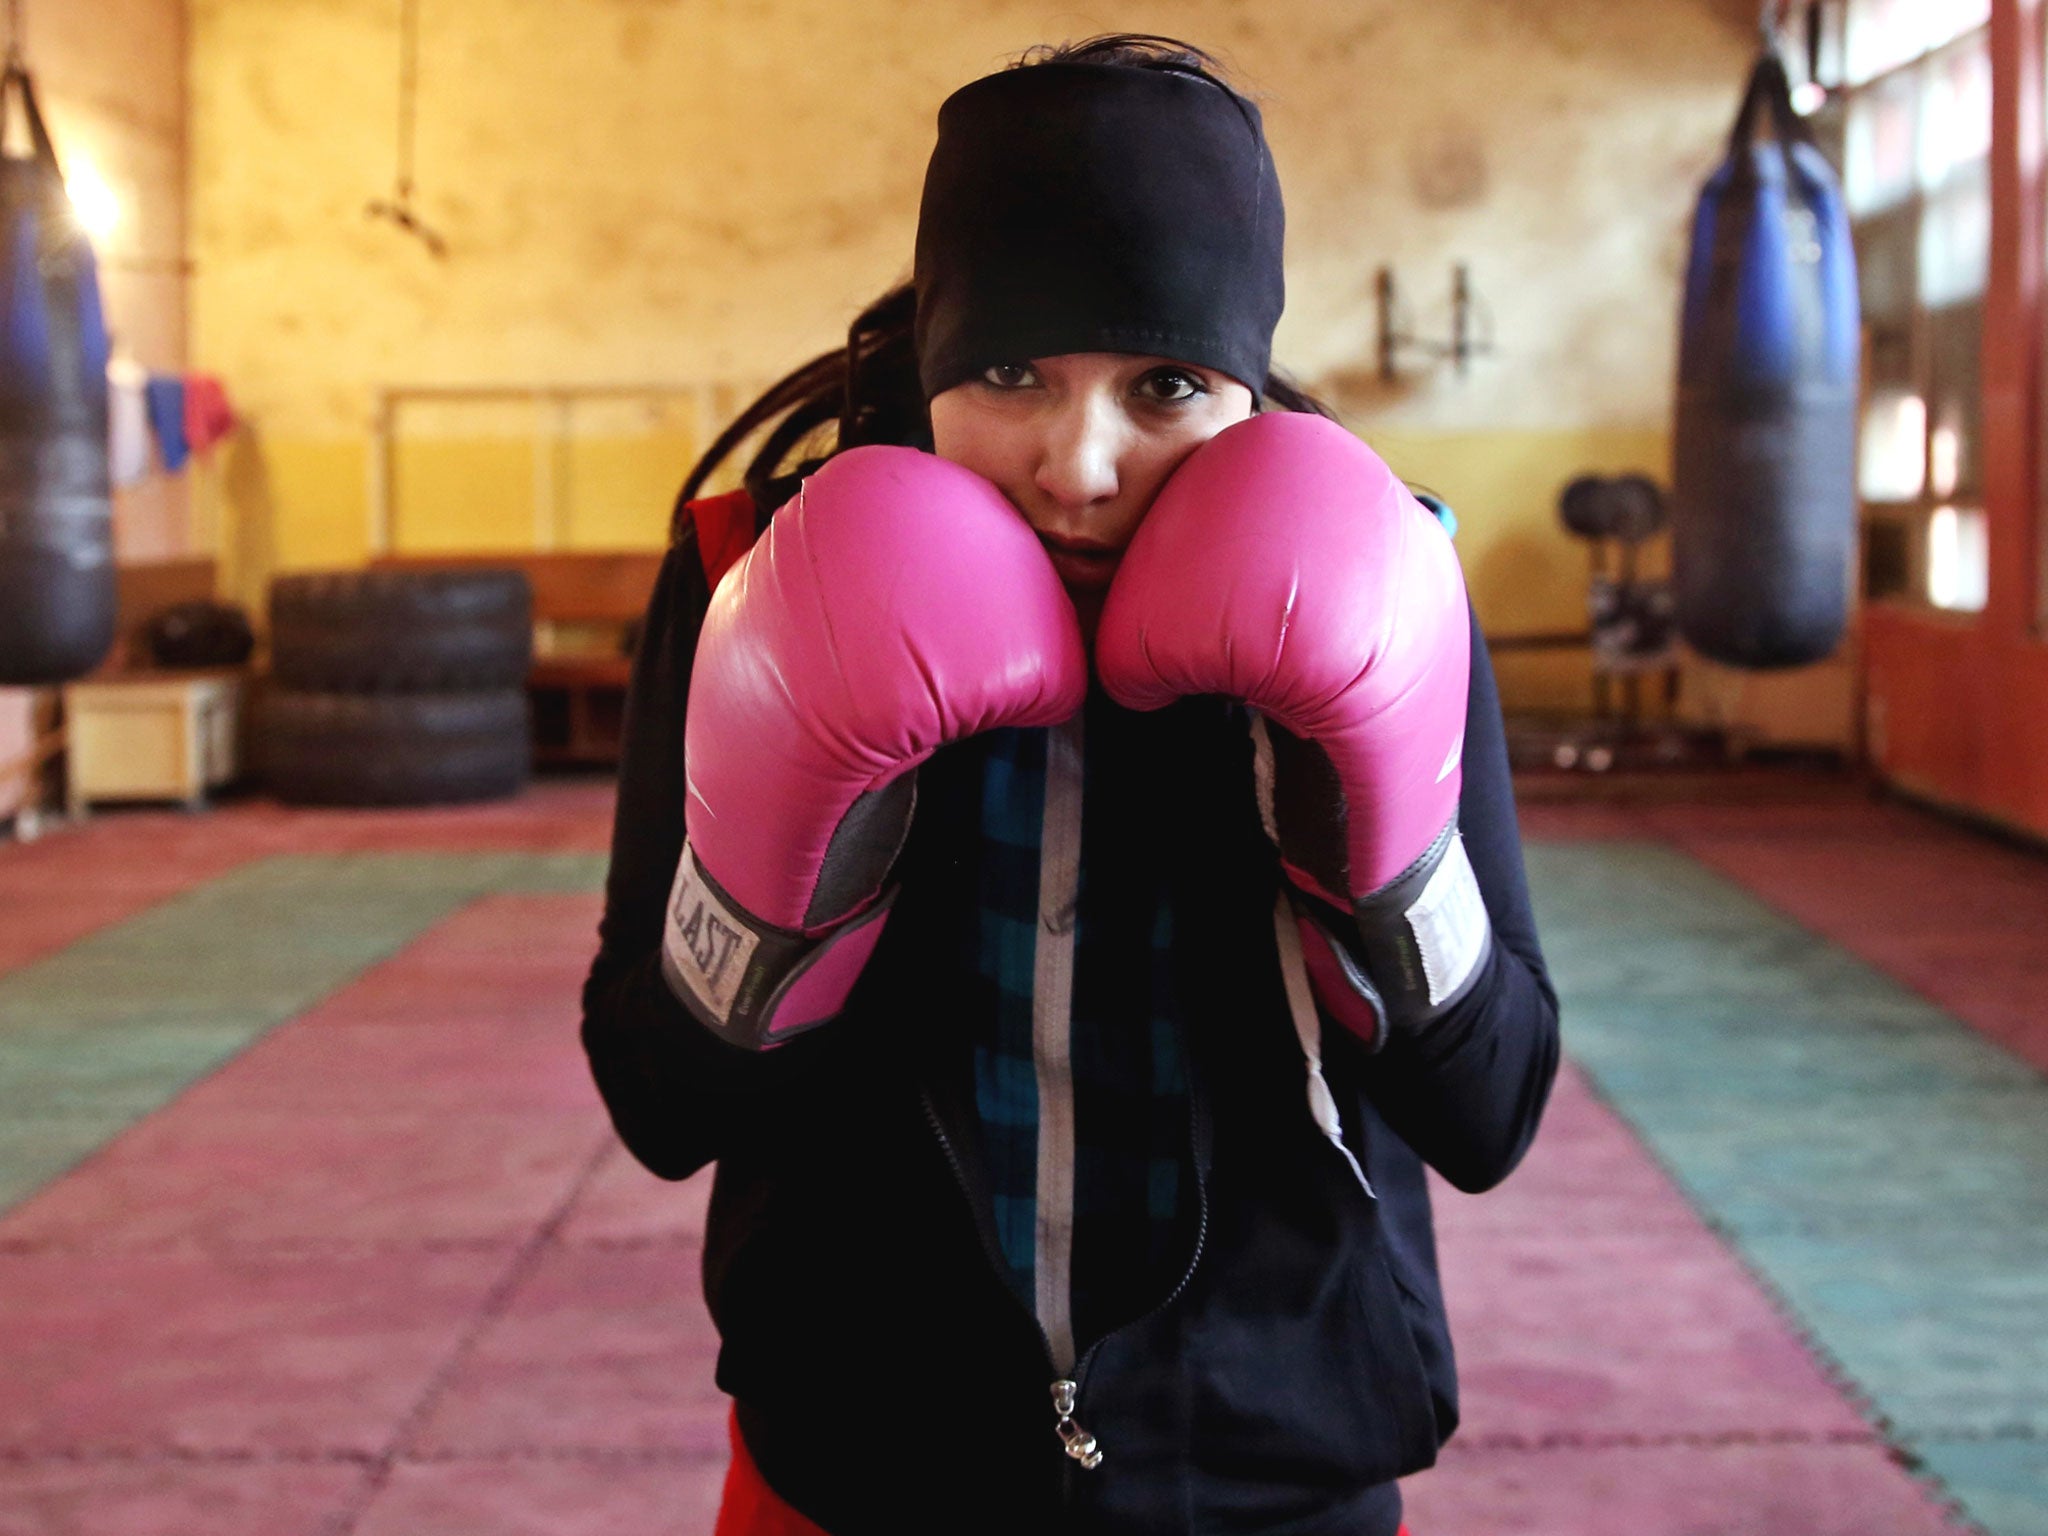 The Afghanistan National Olympic Committee boxing club includes fewer than a dozen women. It was previously supported by nongovernmental organizations however in recent years the club has struggled financially